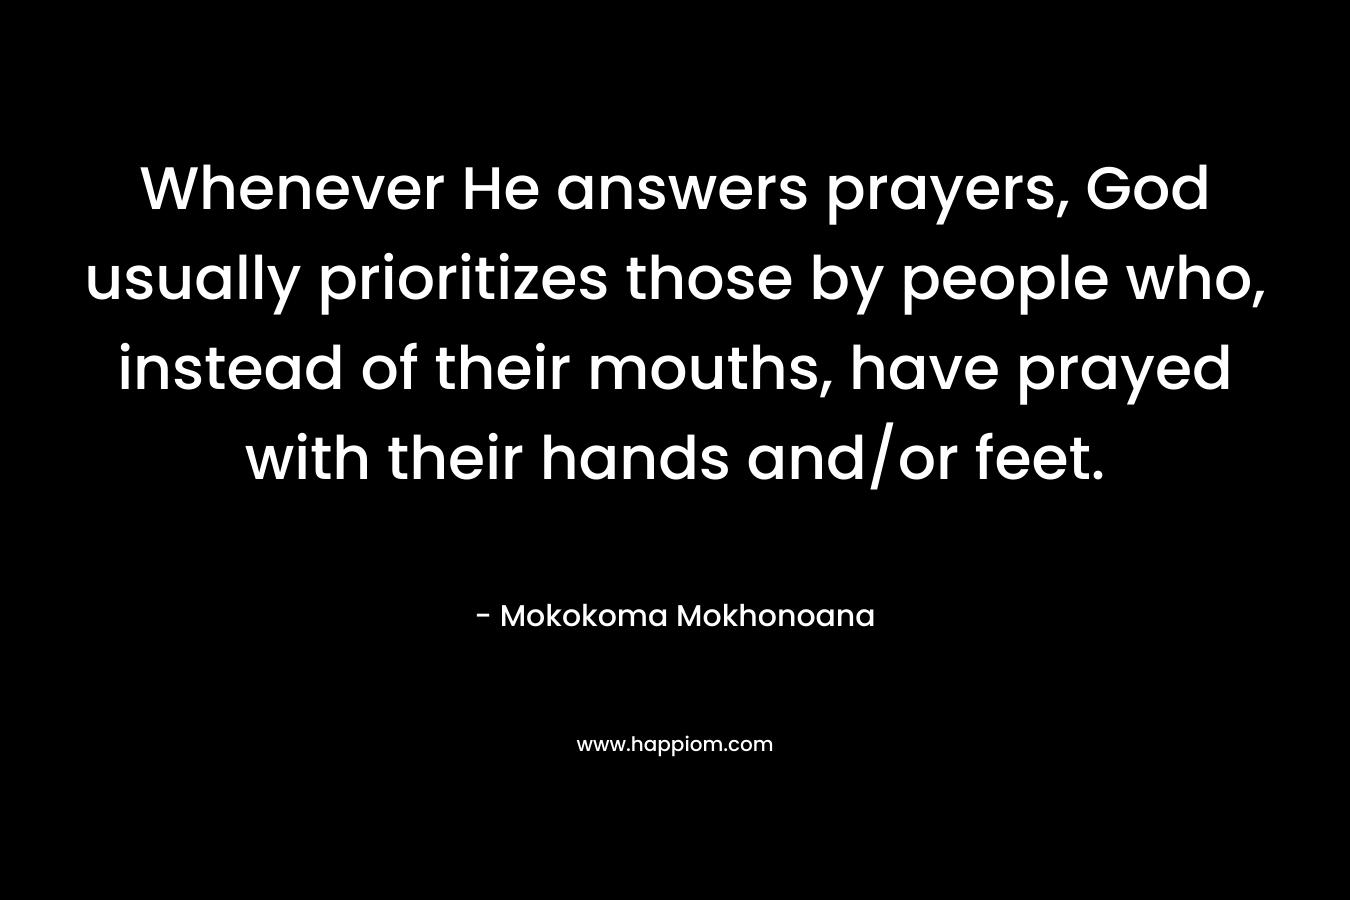 Whenever He answers prayers, God usually prioritizes those by people who, instead of their mouths, have prayed with their hands and/or feet. – Mokokoma Mokhonoana